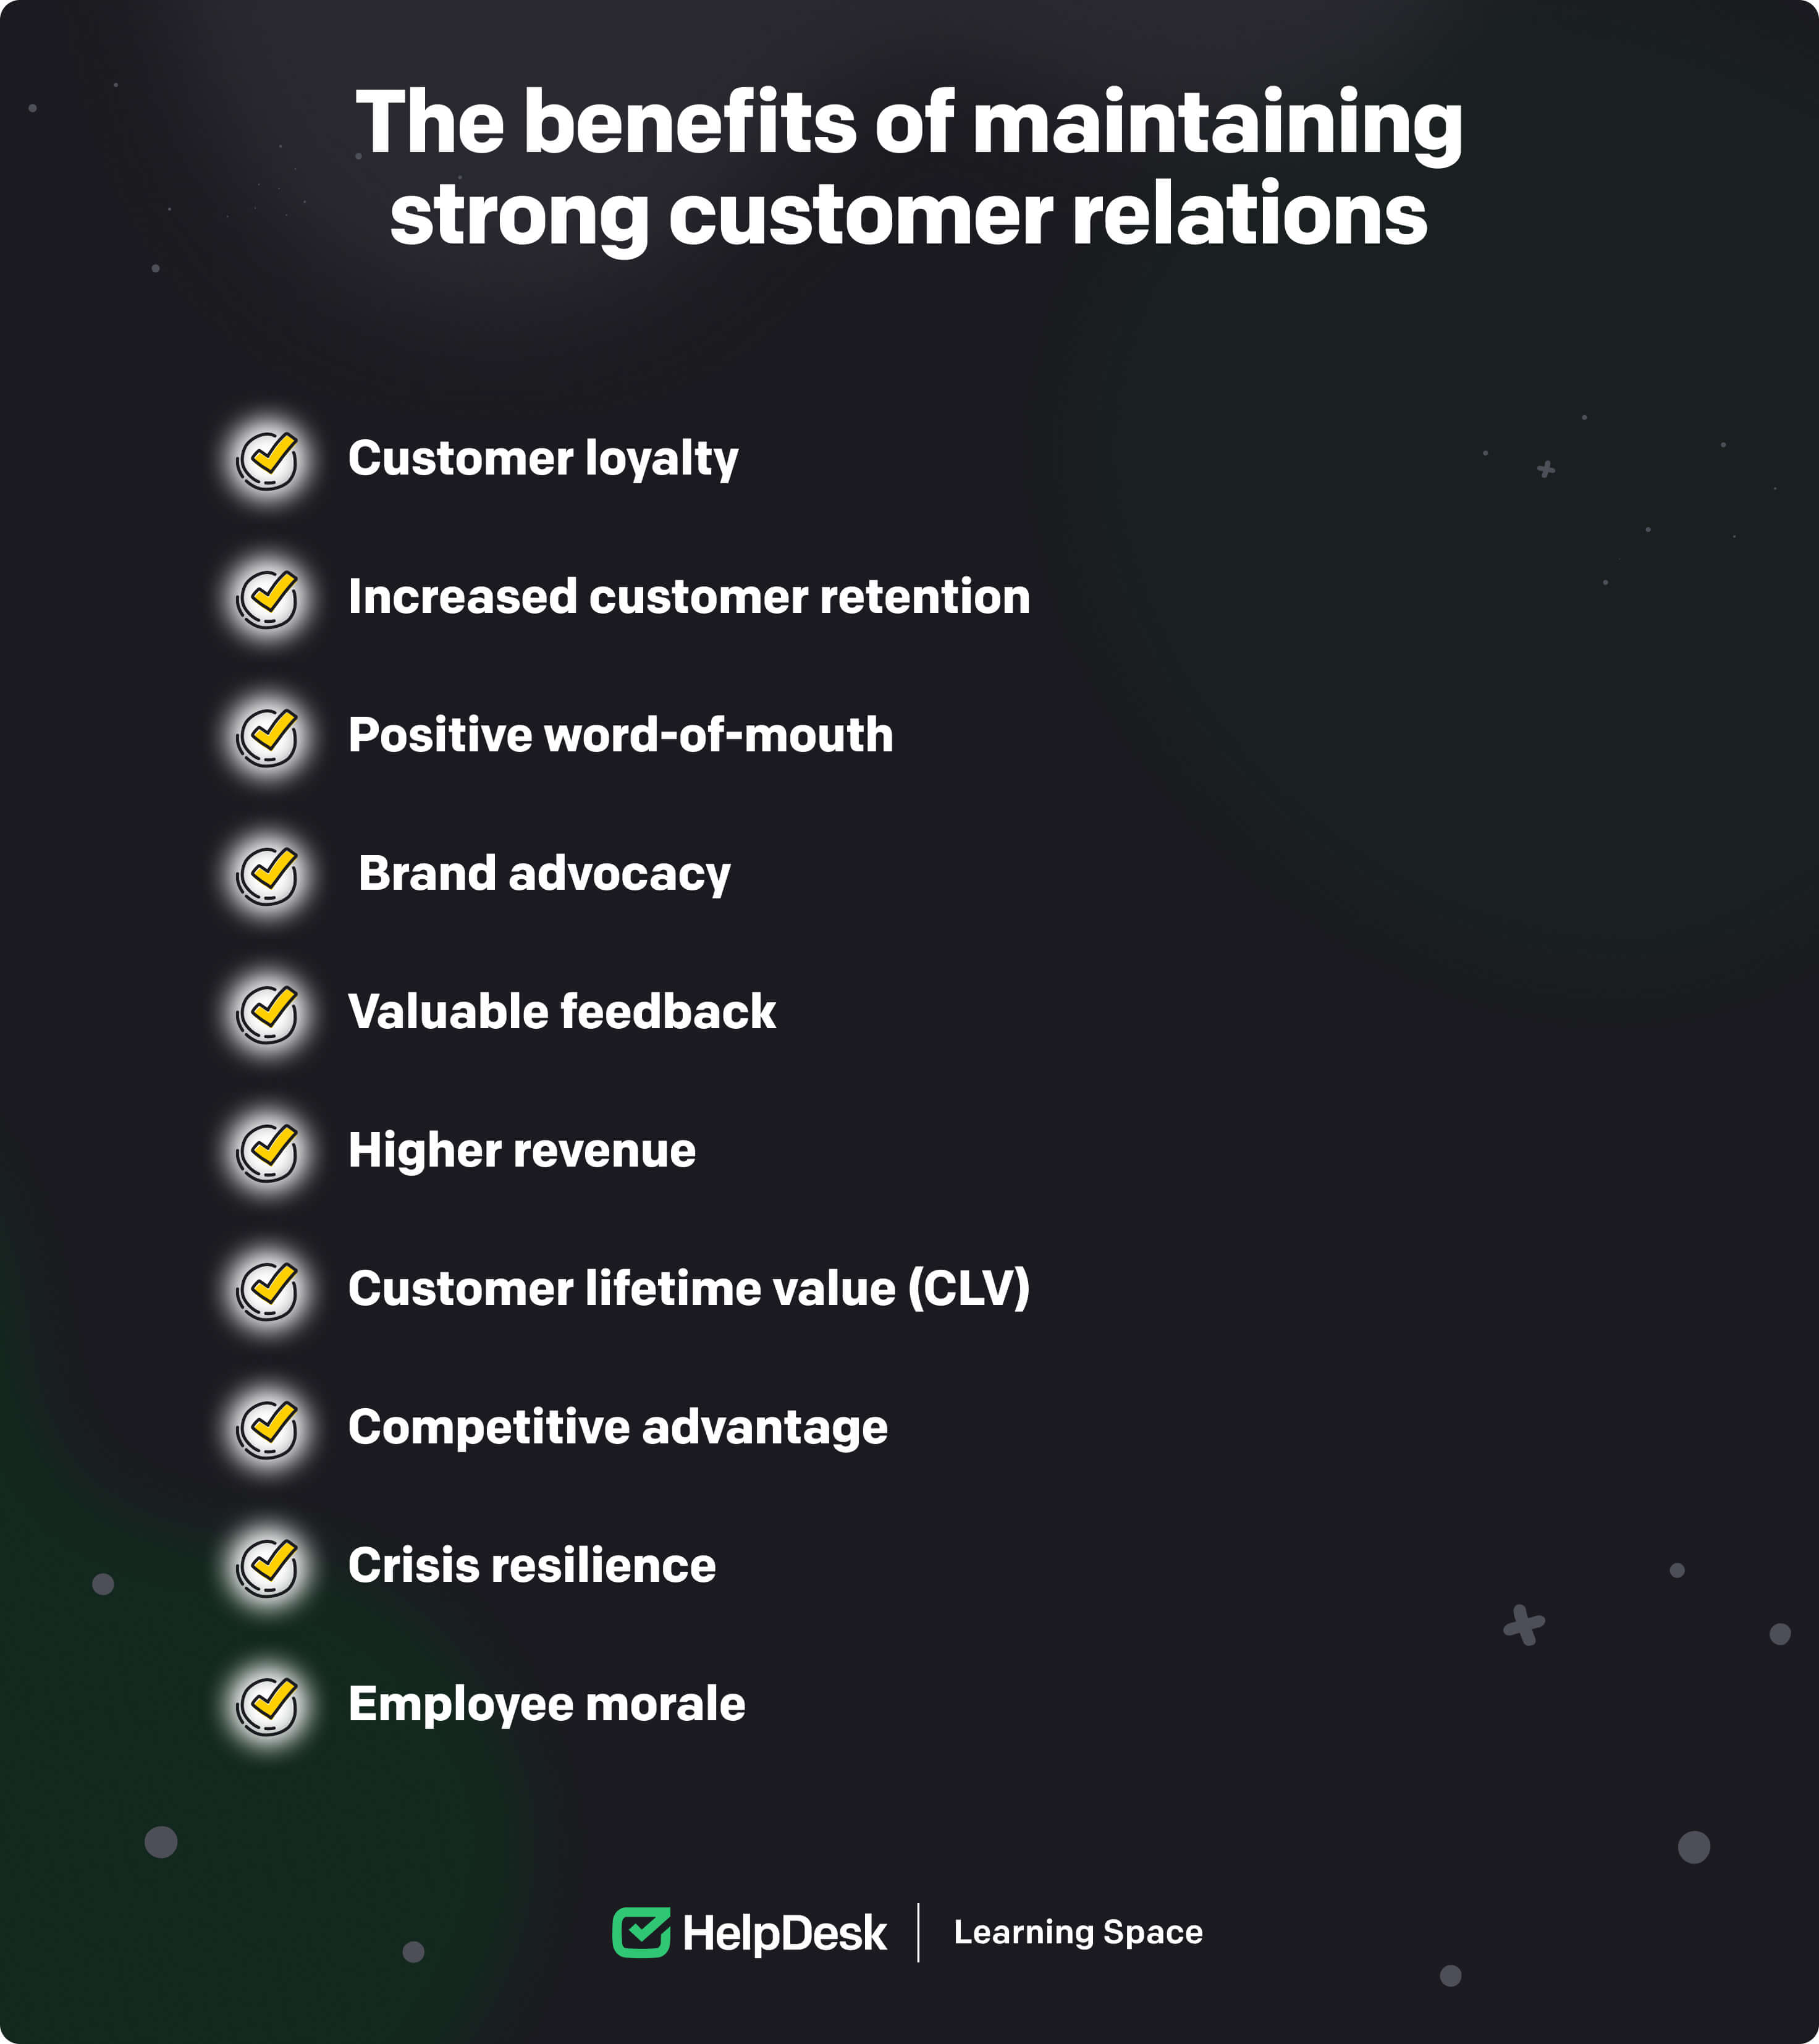 Benefits of maintaining strong customer relations